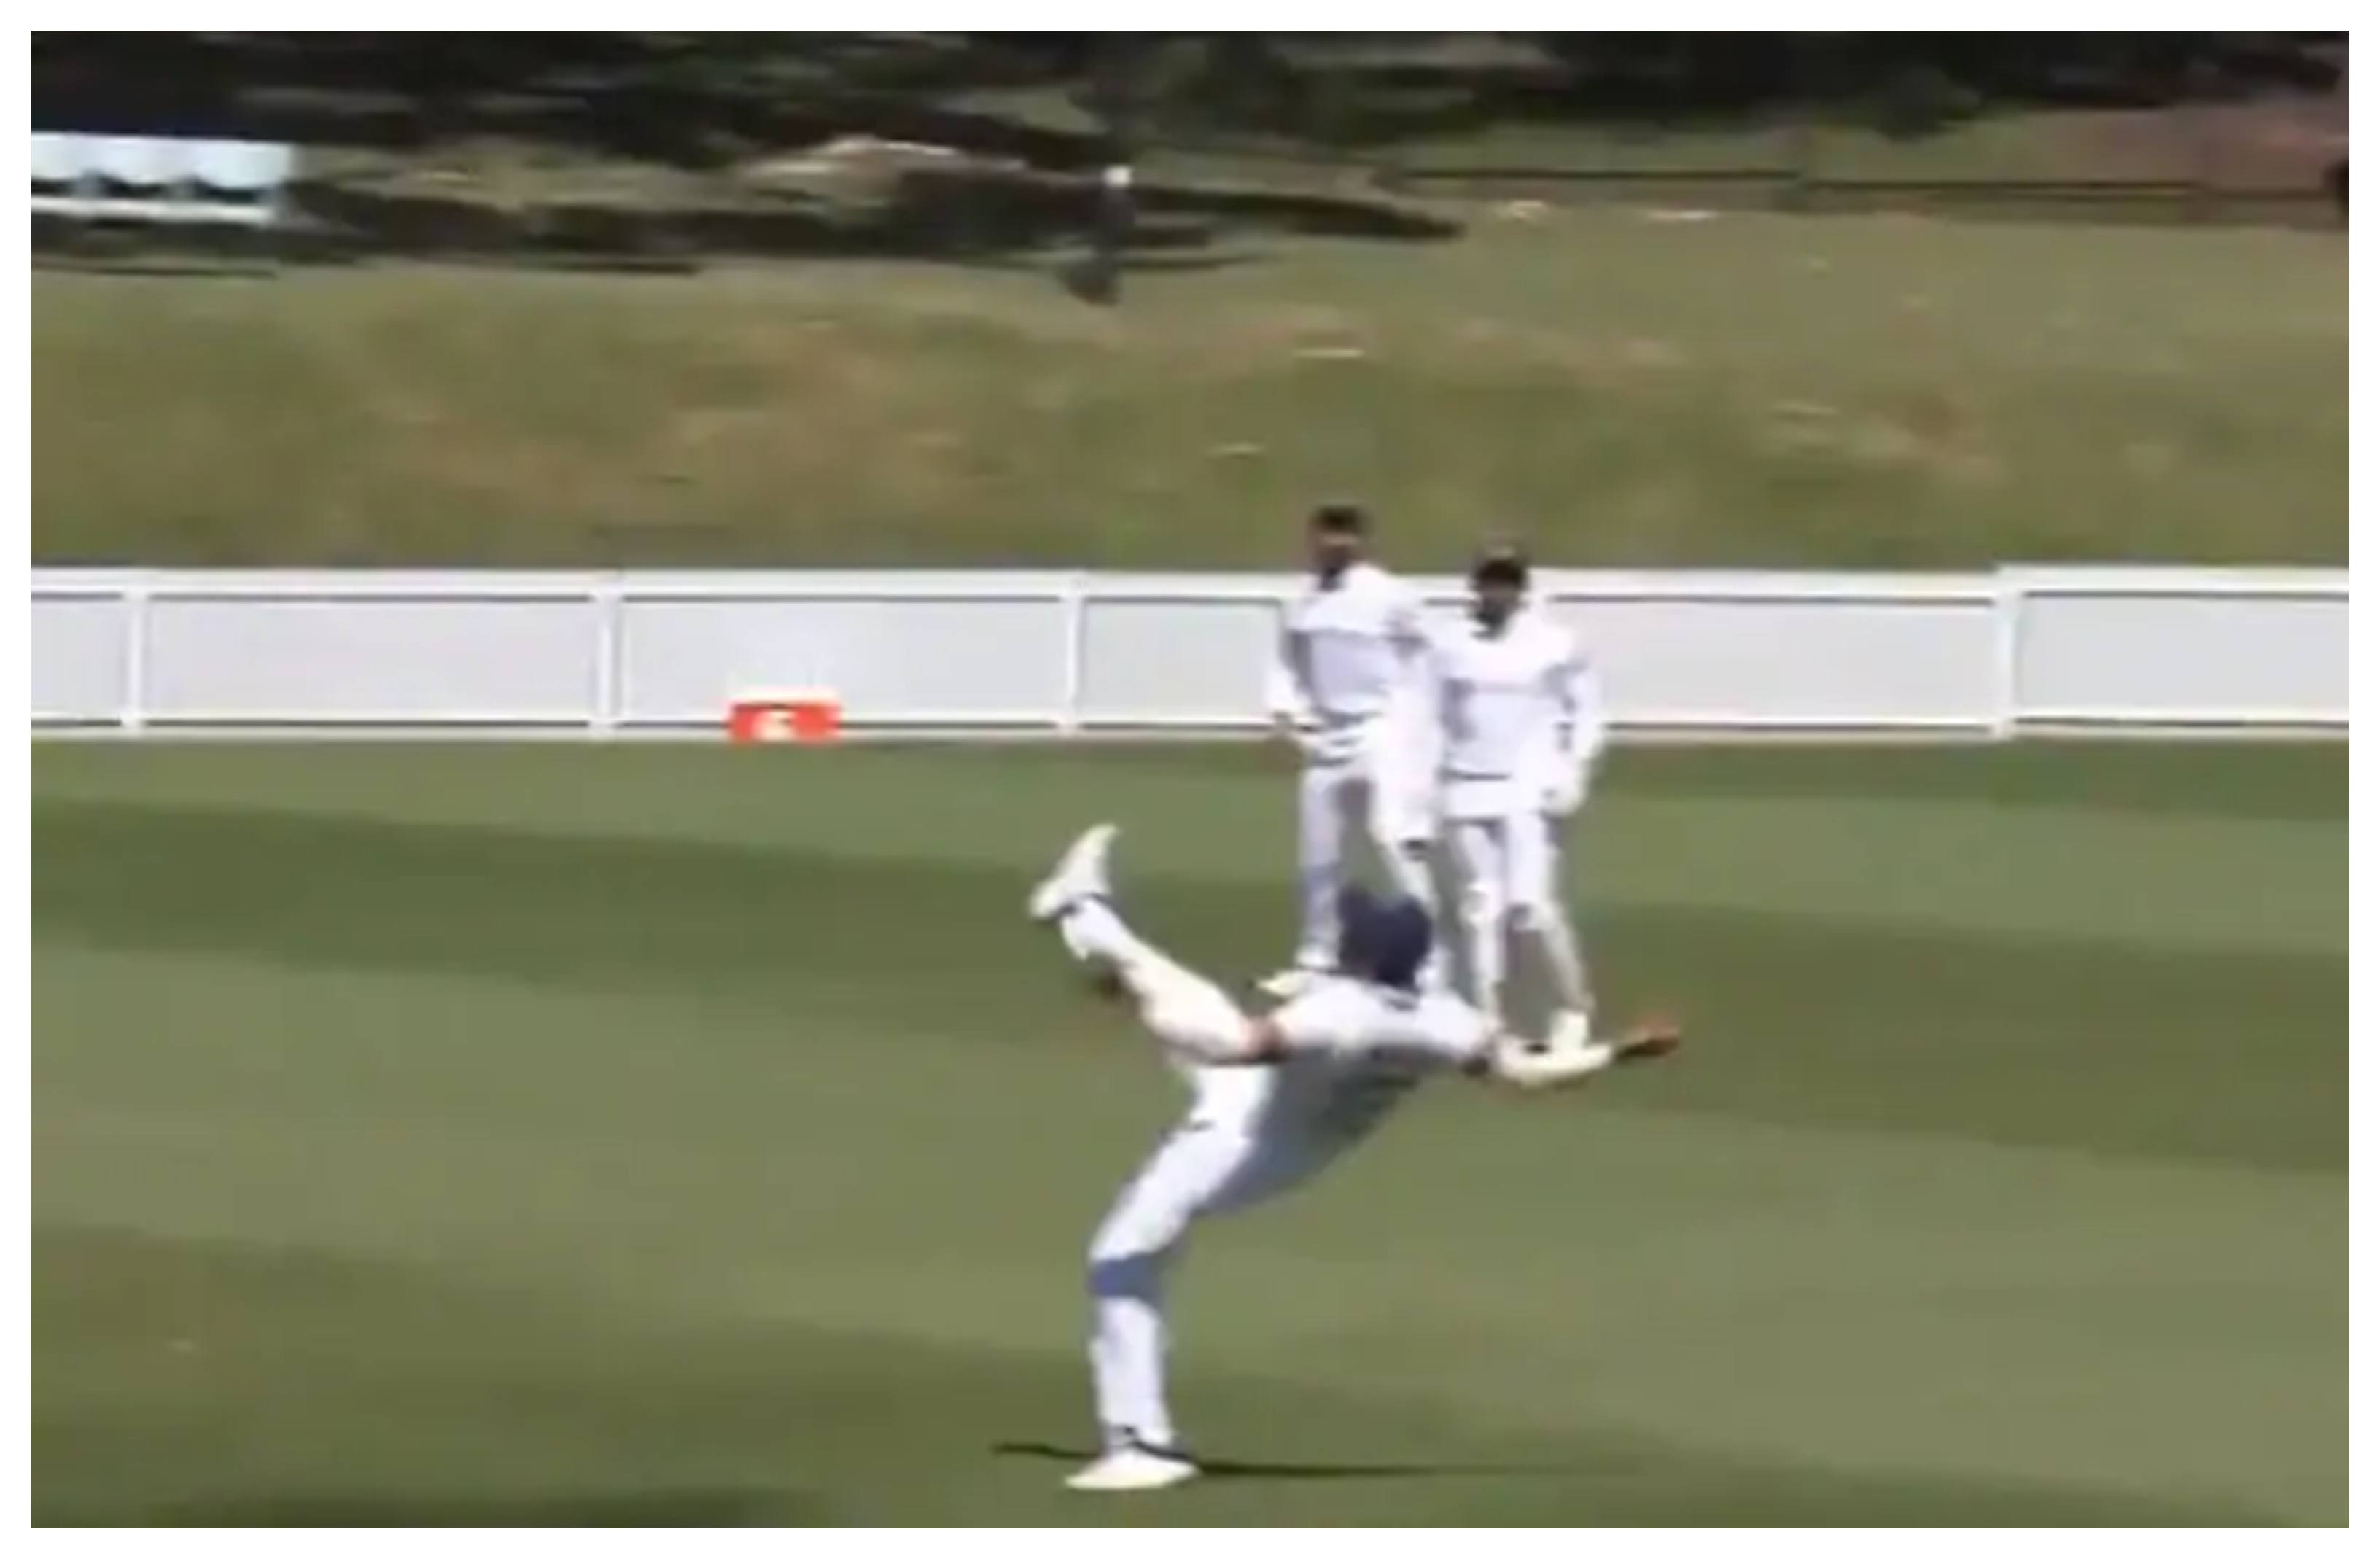 Prithvi Shaw takes a one-handed stunner | Screengrab